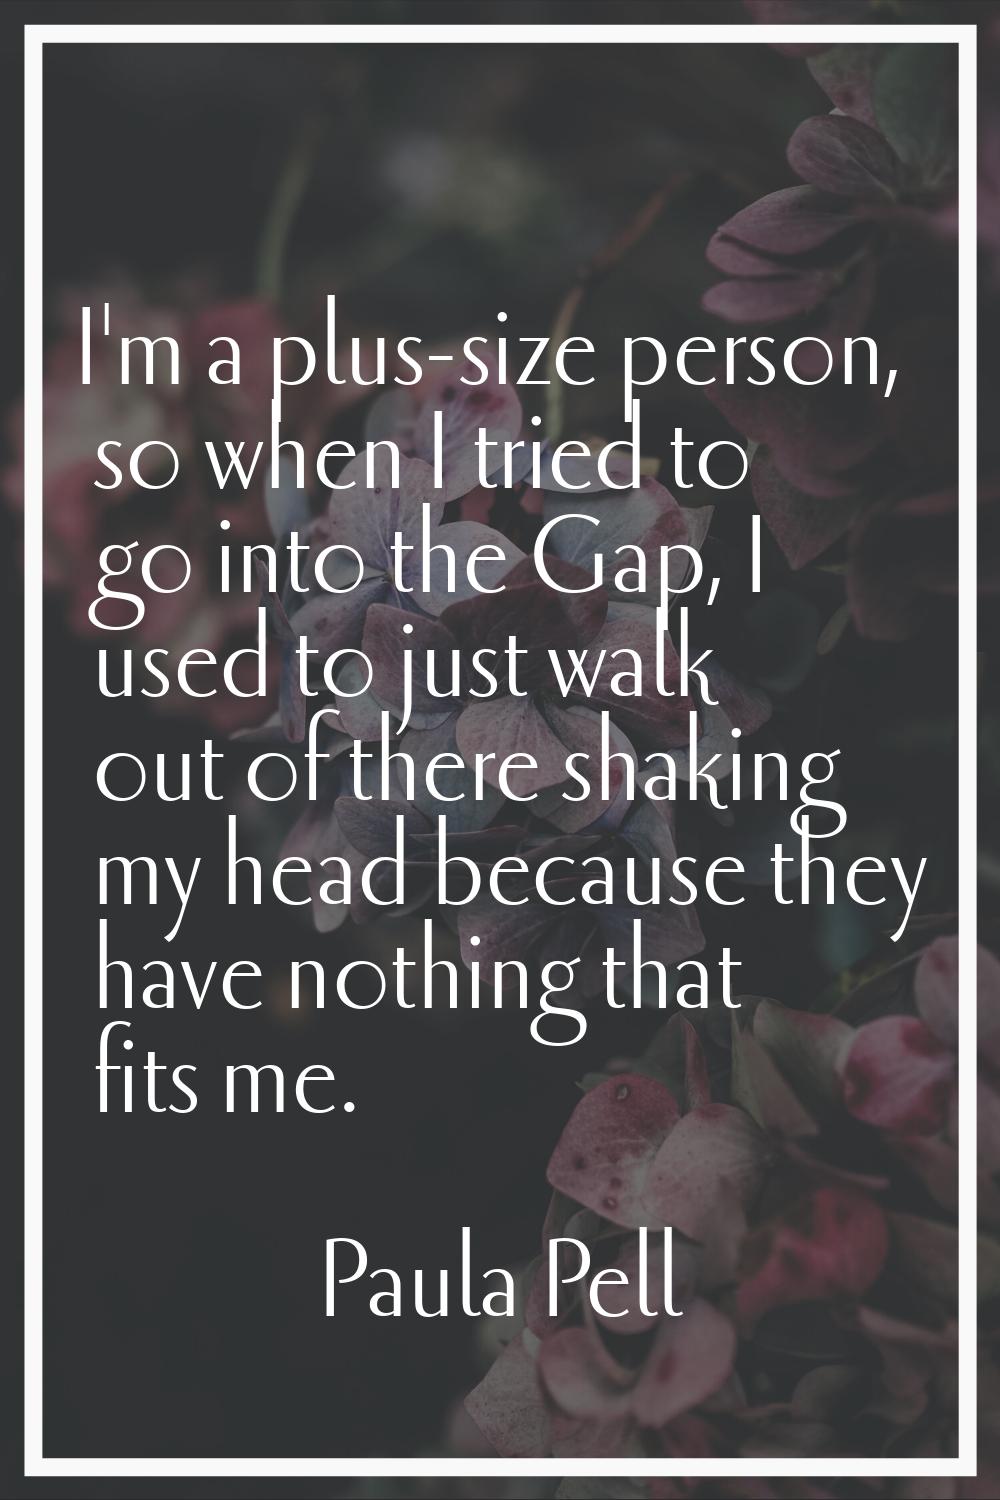 I'm a plus-size person, so when I tried to go into the Gap, I used to just walk out of there shakin